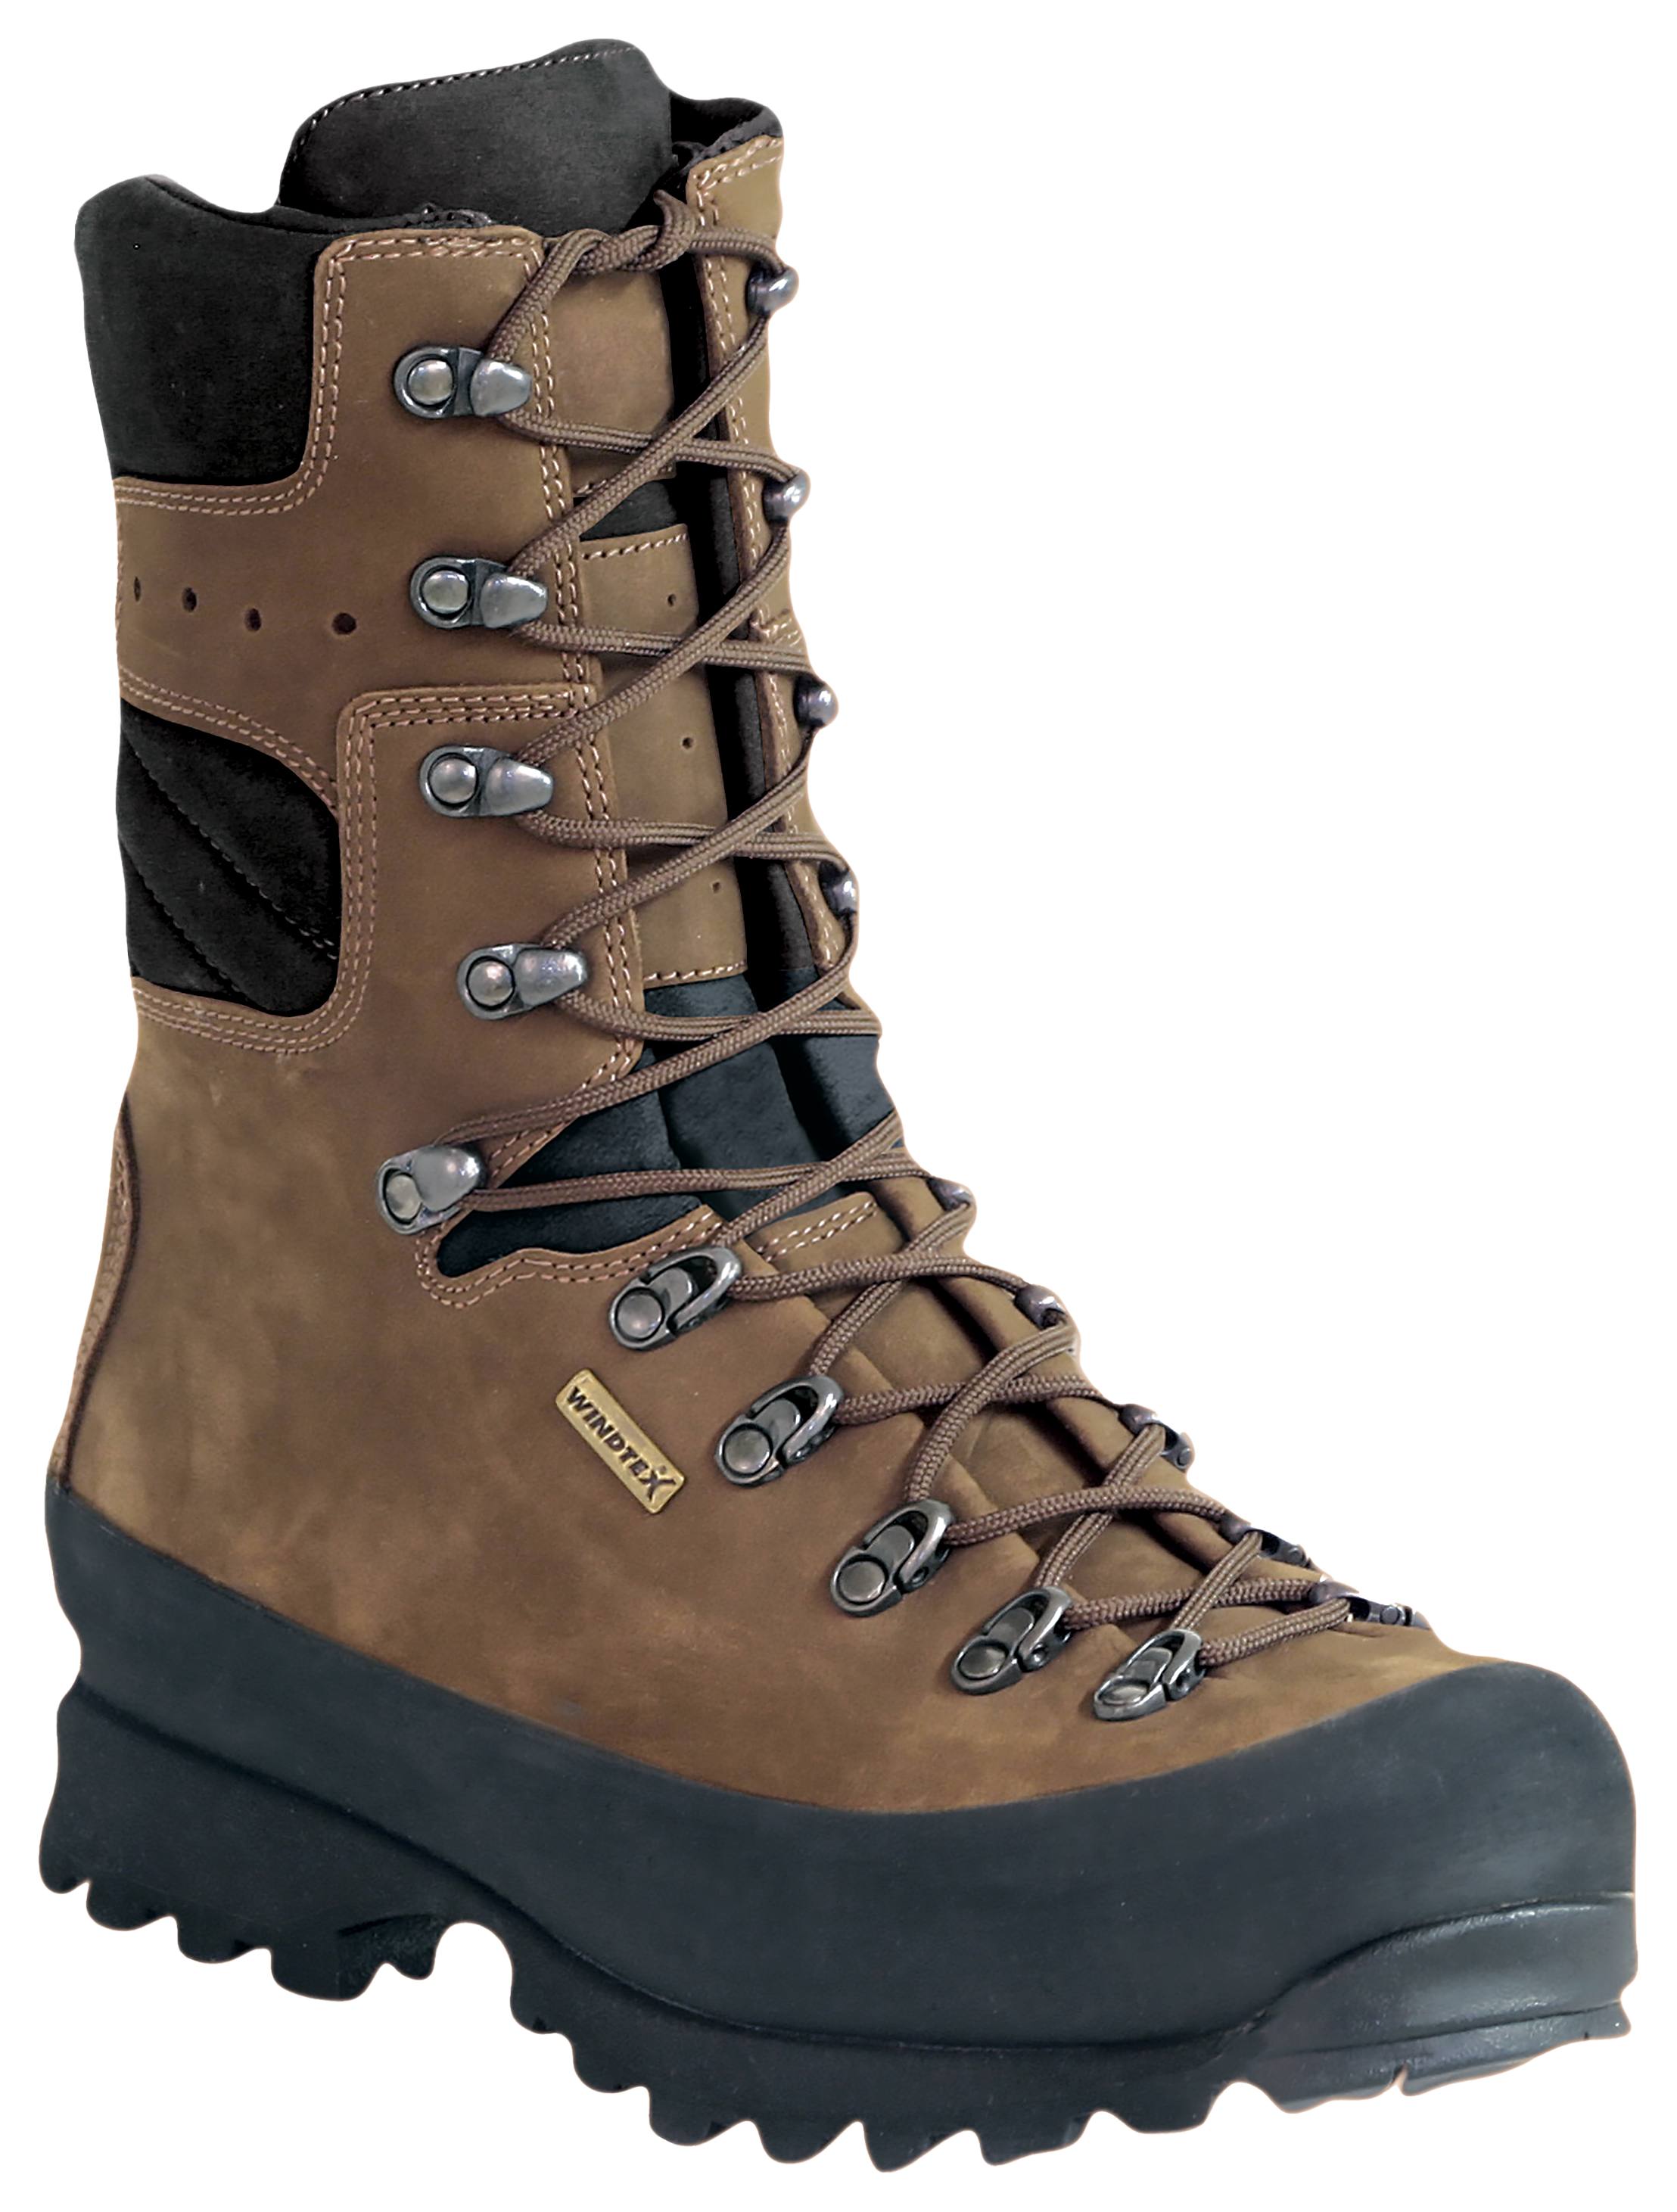 Kenetrek Mountain Extreme 1000 Insulated Waterproof Hunting Boots for Men - Brown - 14M